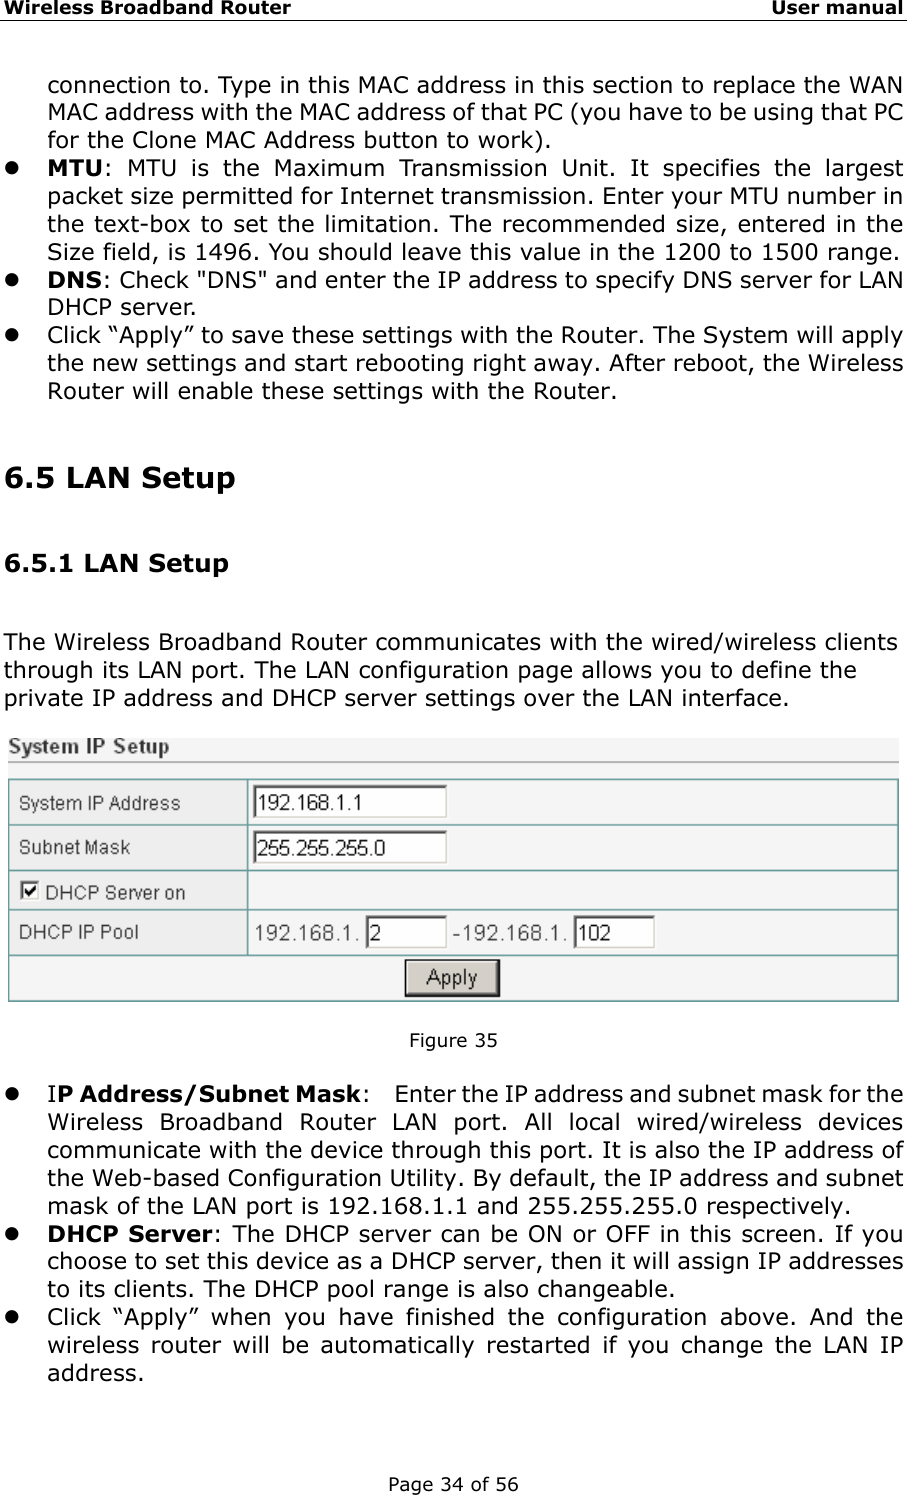 Wireless Broadband Router                                                   User manual Page 34 of 56 connection to. Type in this MAC address in this section to replace the WAN MAC address with the MAC address of that PC (you have to be using that PC for the Clone MAC Address button to work). z MTU: MTU is the Maximum Transmission Unit. It specifies the largest packet size permitted for Internet transmission. Enter your MTU number in the text-box to set the limitation. The recommended size, entered in the Size field, is 1496. You should leave this value in the 1200 to 1500 range. z DNS: Check &quot;DNS&quot; and enter the IP address to specify DNS server for LAN DHCP server. z Click “Apply” to save these settings with the Router. The System will apply the new settings and start rebooting right away. After reboot, the Wireless Router will enable these settings with the Router.  6.5 LAN Setup 6.5.1 LAN Setup The Wireless Broadband Router communicates with the wired/wireless clients through its LAN port. The LAN configuration page allows you to define the private IP address and DHCP server settings over the LAN interface.    Figure 35  z IP Address/Subnet Mask:    Enter the IP address and subnet mask for the Wireless Broadband Router LAN port. All local wired/wireless devices communicate with the device through this port. It is also the IP address of the Web-based Configuration Utility. By default, the IP address and subnet mask of the LAN port is 192.168.1.1 and 255.255.255.0 respectively.   z DHCP Server: The DHCP server can be ON or OFF in this screen. If you choose to set this device as a DHCP server, then it will assign IP addresses to its clients. The DHCP pool range is also changeable.   z Click “Apply” when you have finished the configuration above. And the wireless router will be automatically restarted if you change the LAN IP address.  